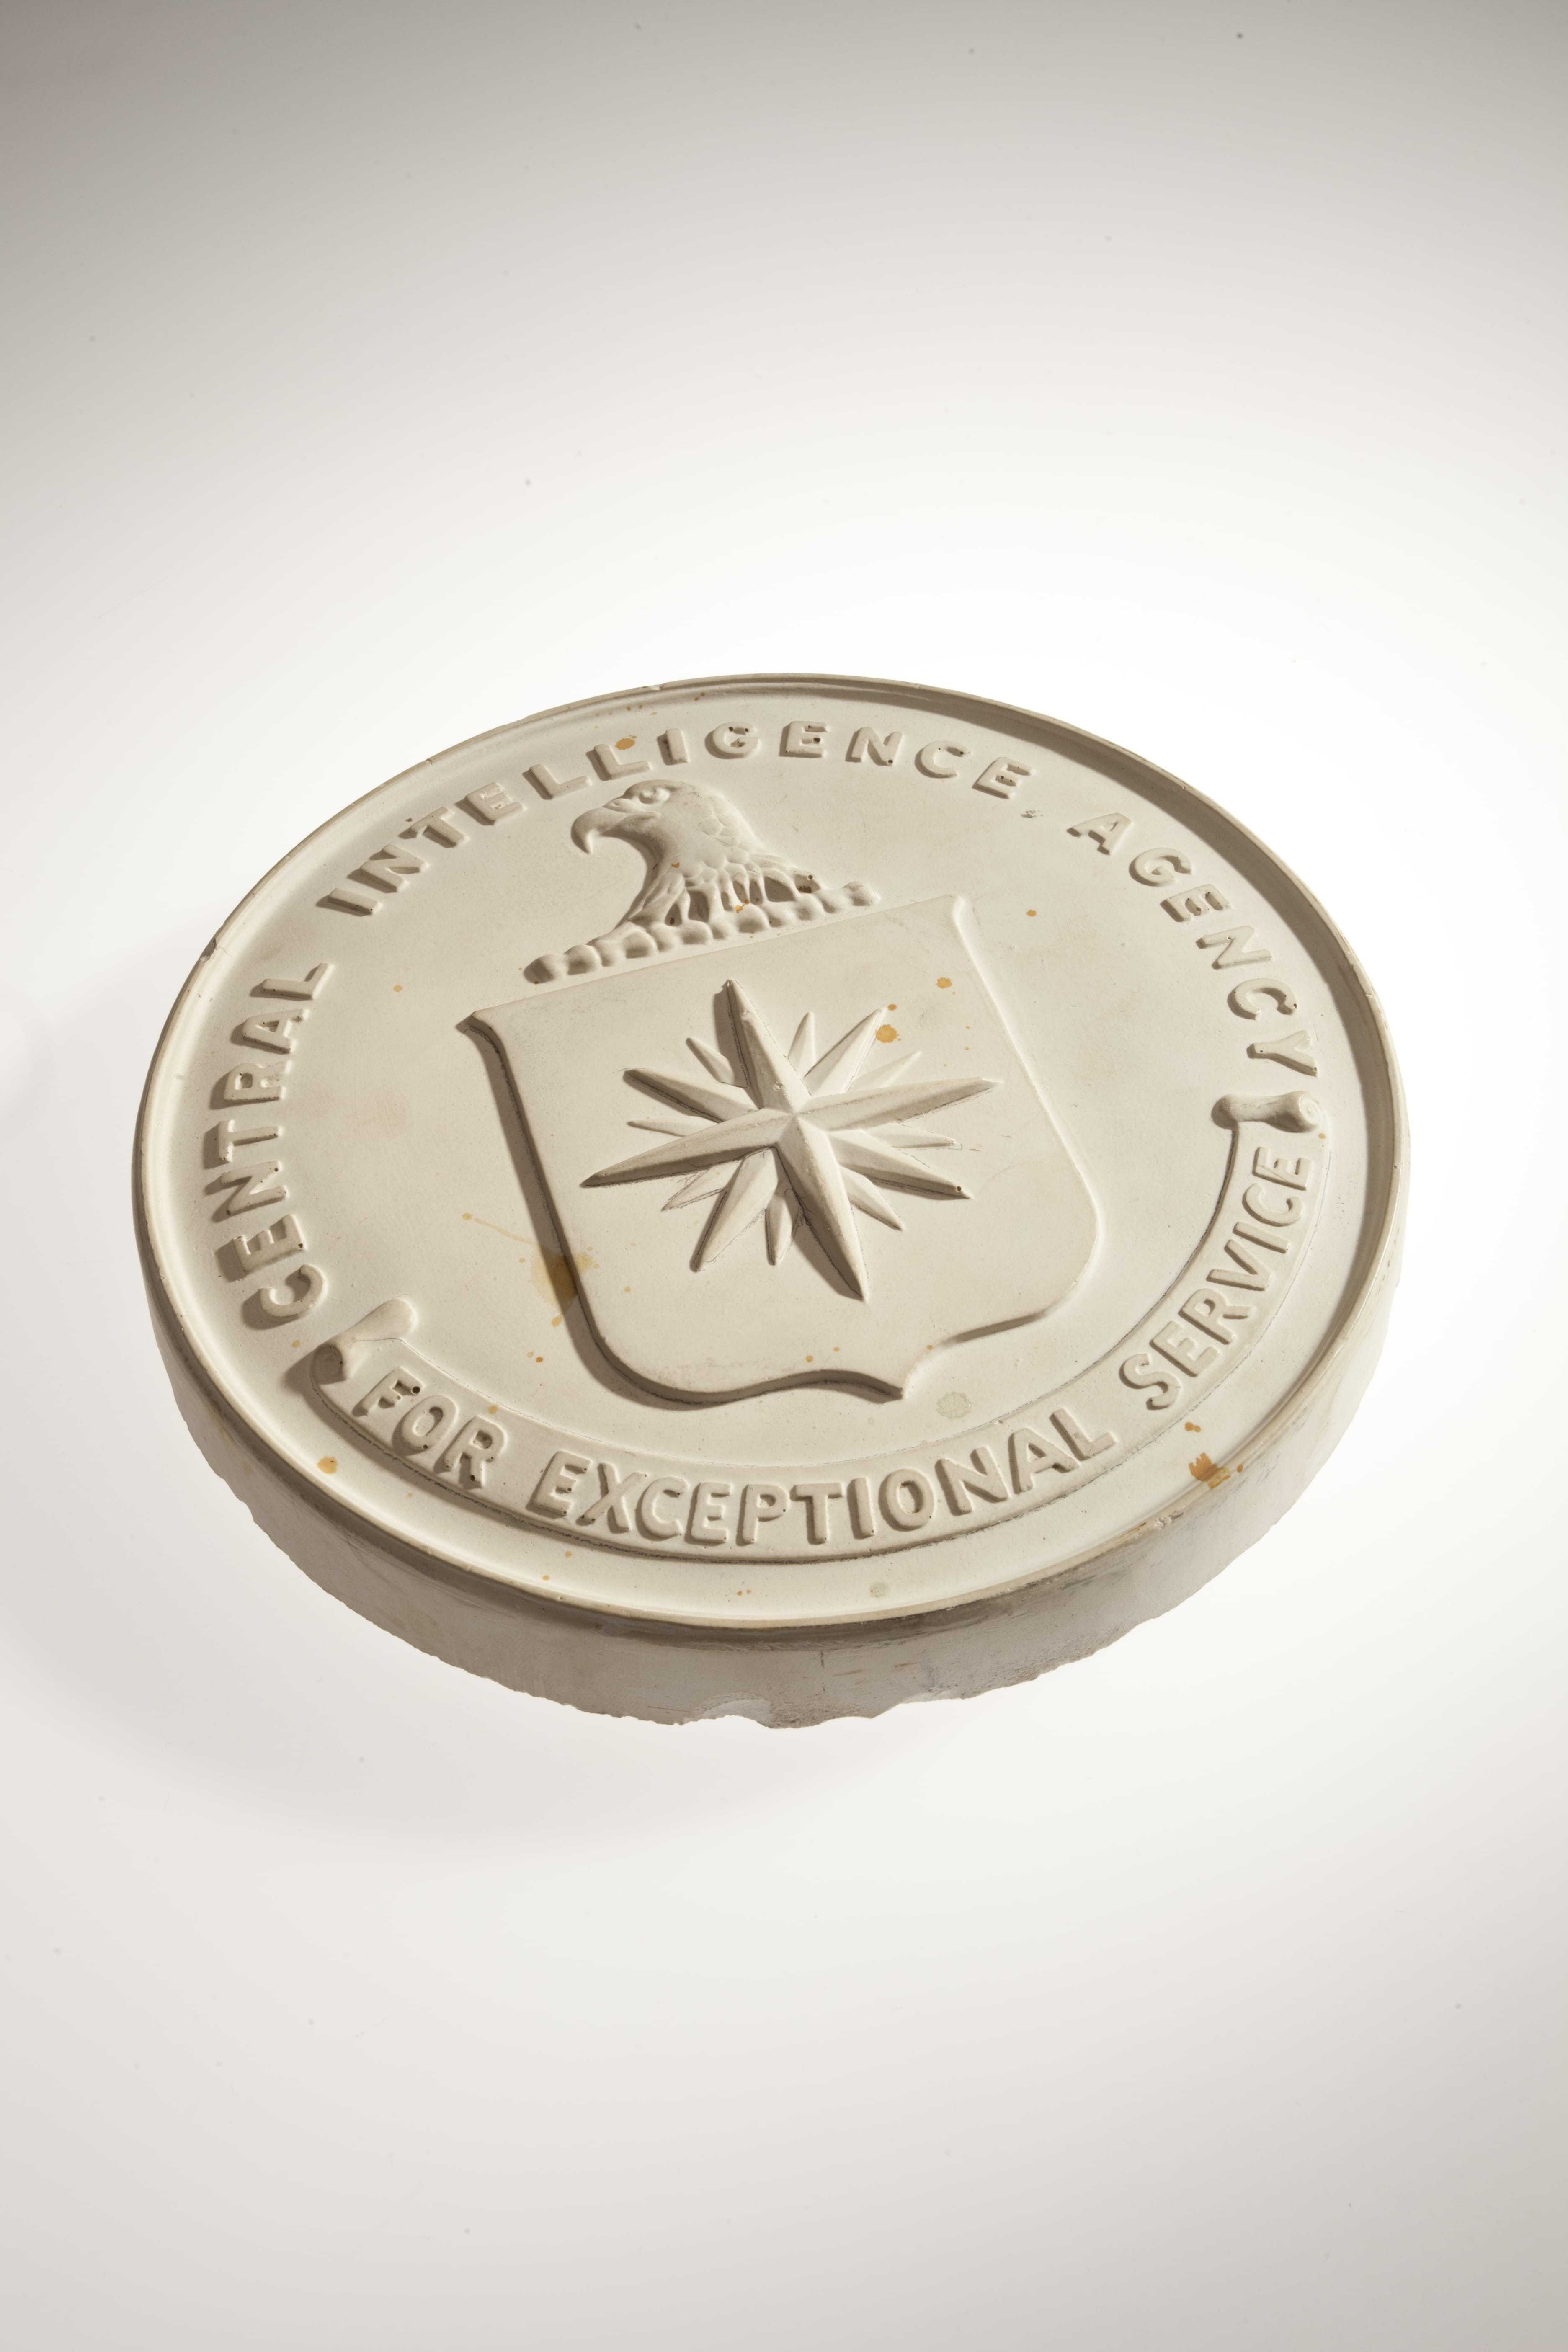 An ivory colored plaster cast of the CIA Seal with the CIA's motto "For Exceptional Service" inscribed at the bottom.